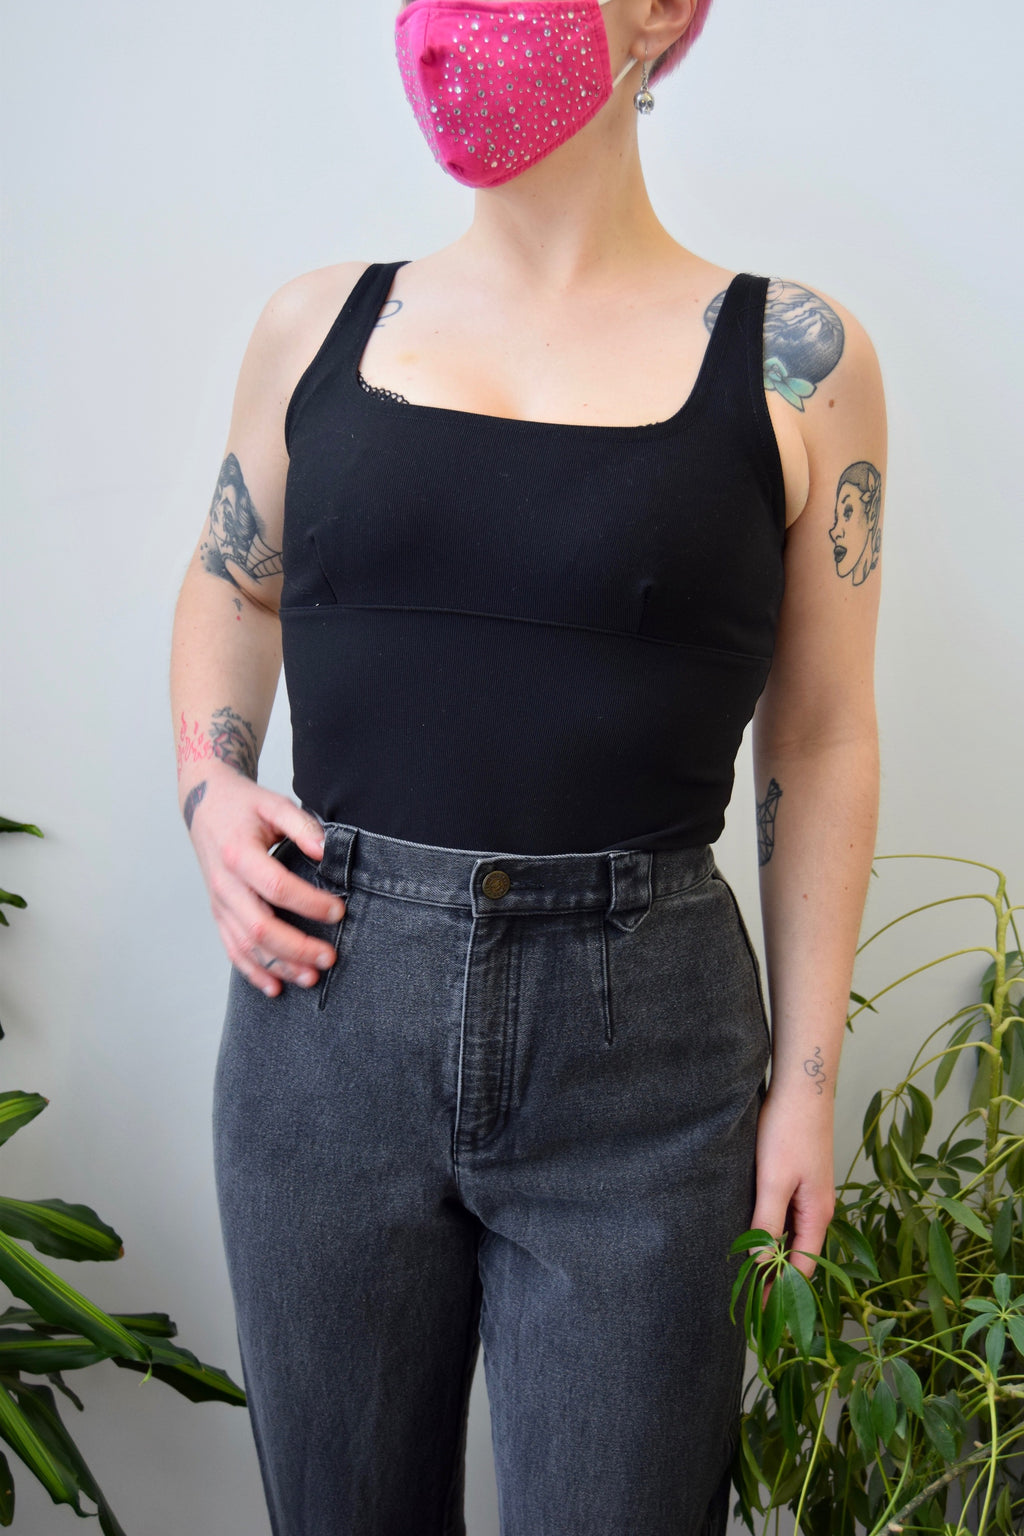 90s Stretchy Bustier Tank